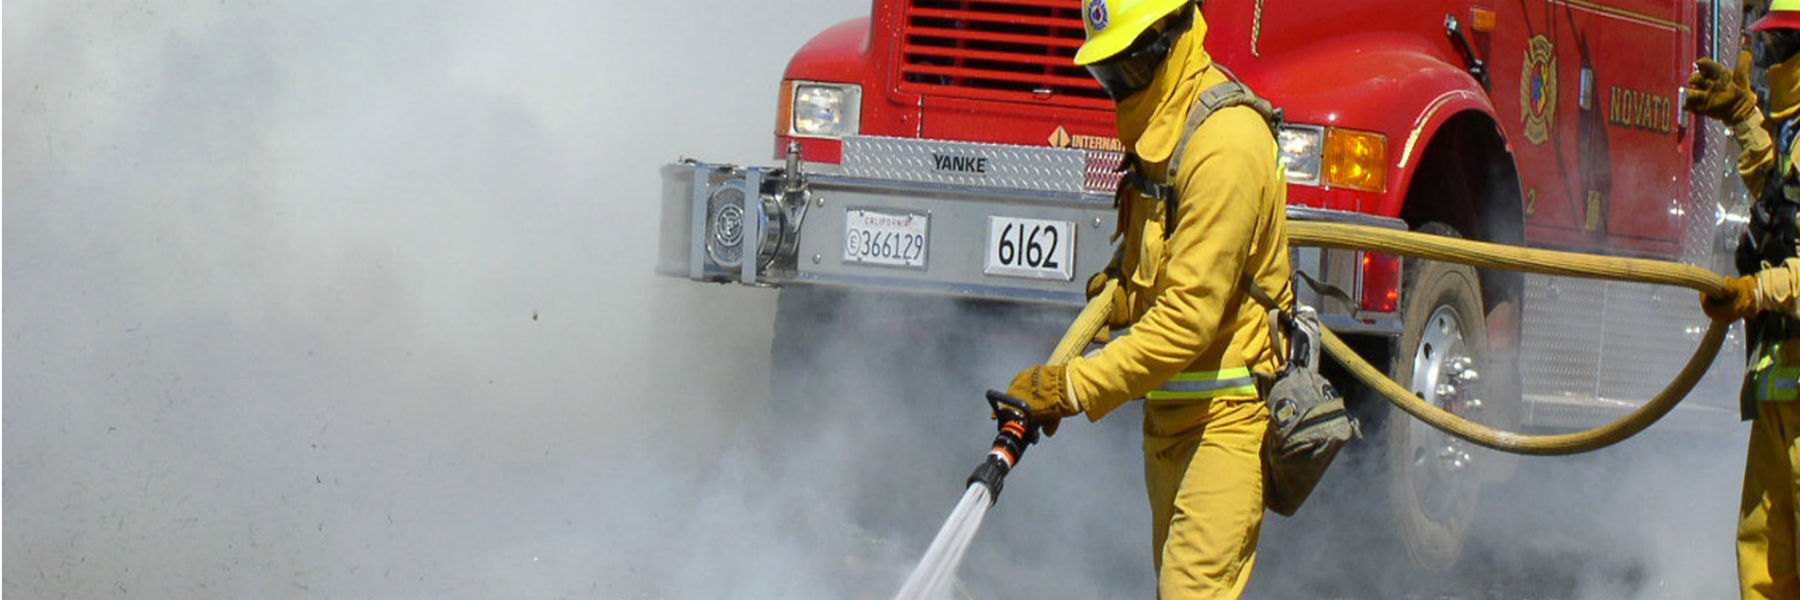 Fireman in front of firetruck with hose